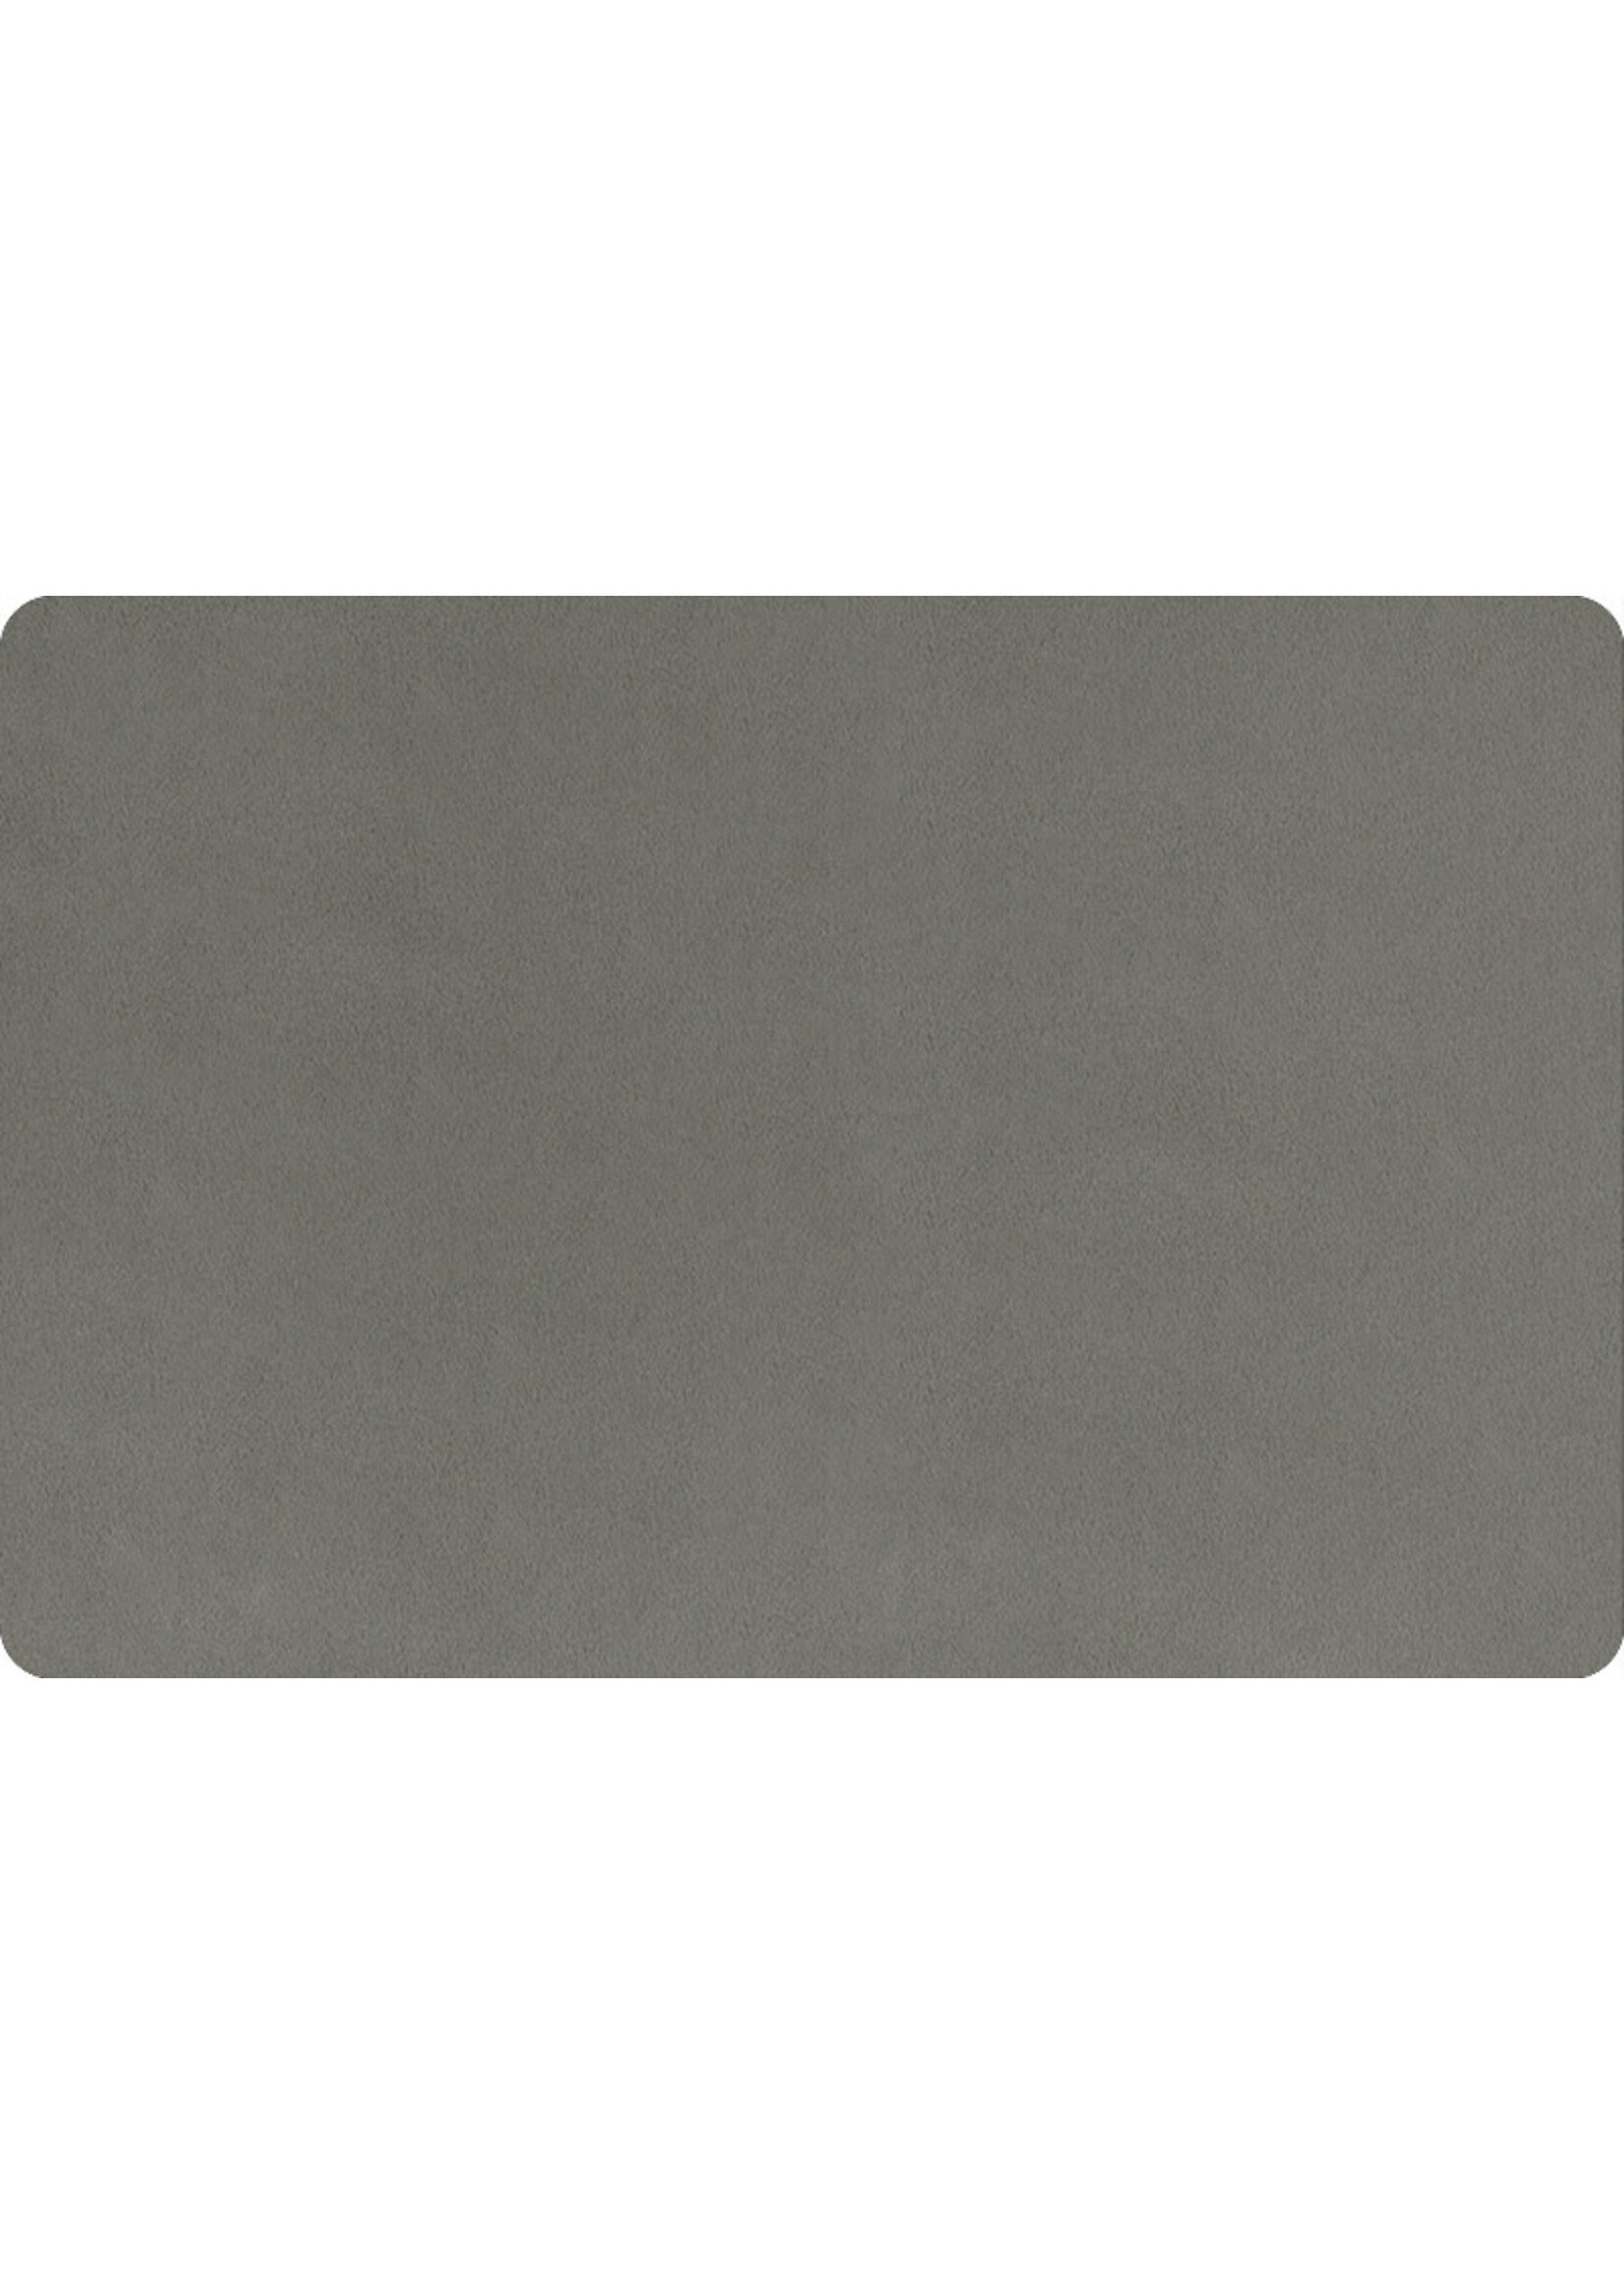 Shannon Fabrics Minky, Extra Wide Solid Cuddle3, 90" Charcoal, (by the inch)